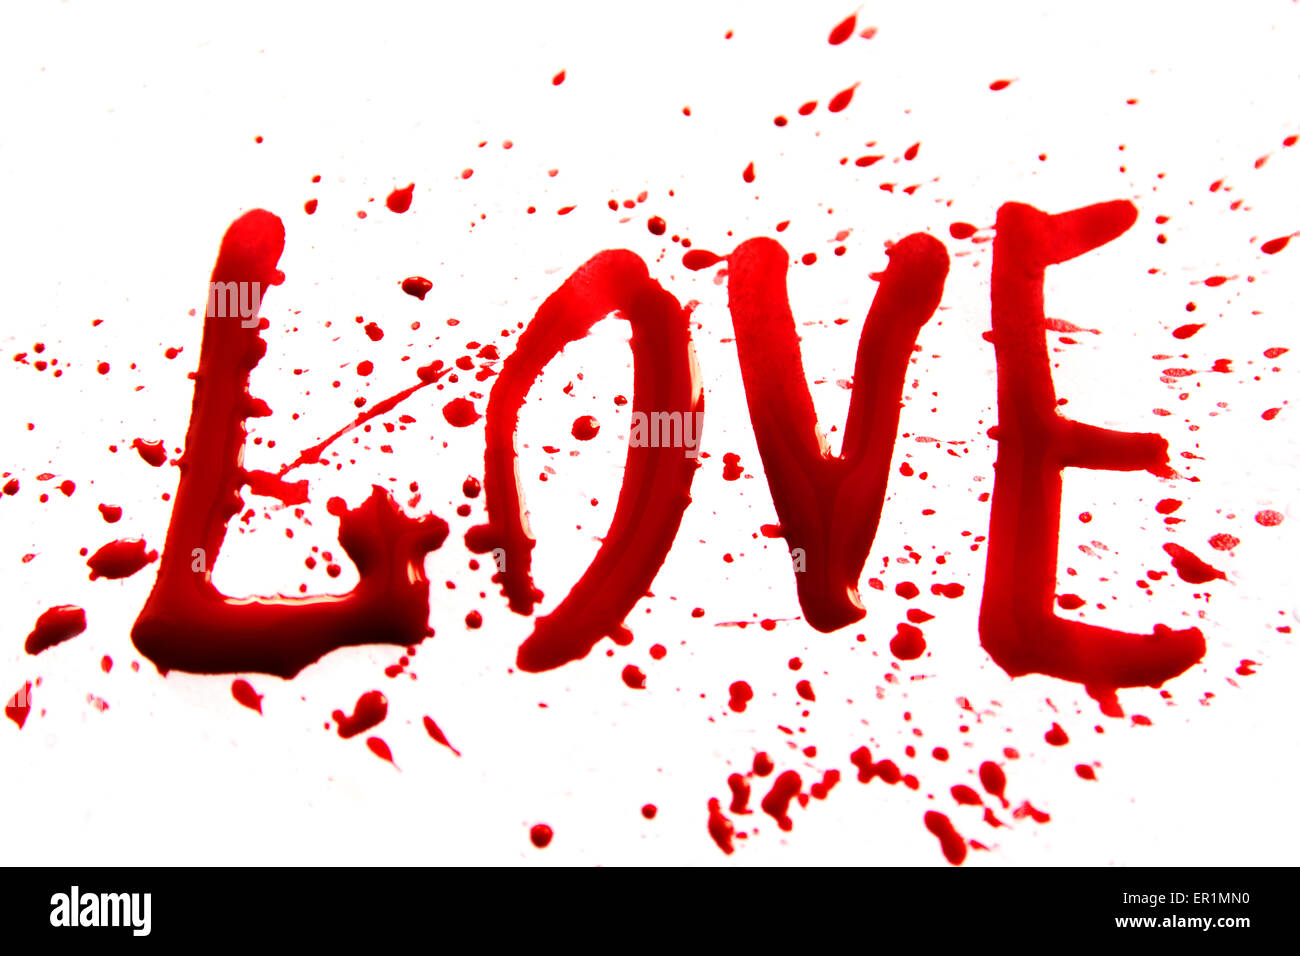 Bloody word Love with splatters, droplets, stains isolated on white background Stock Photo